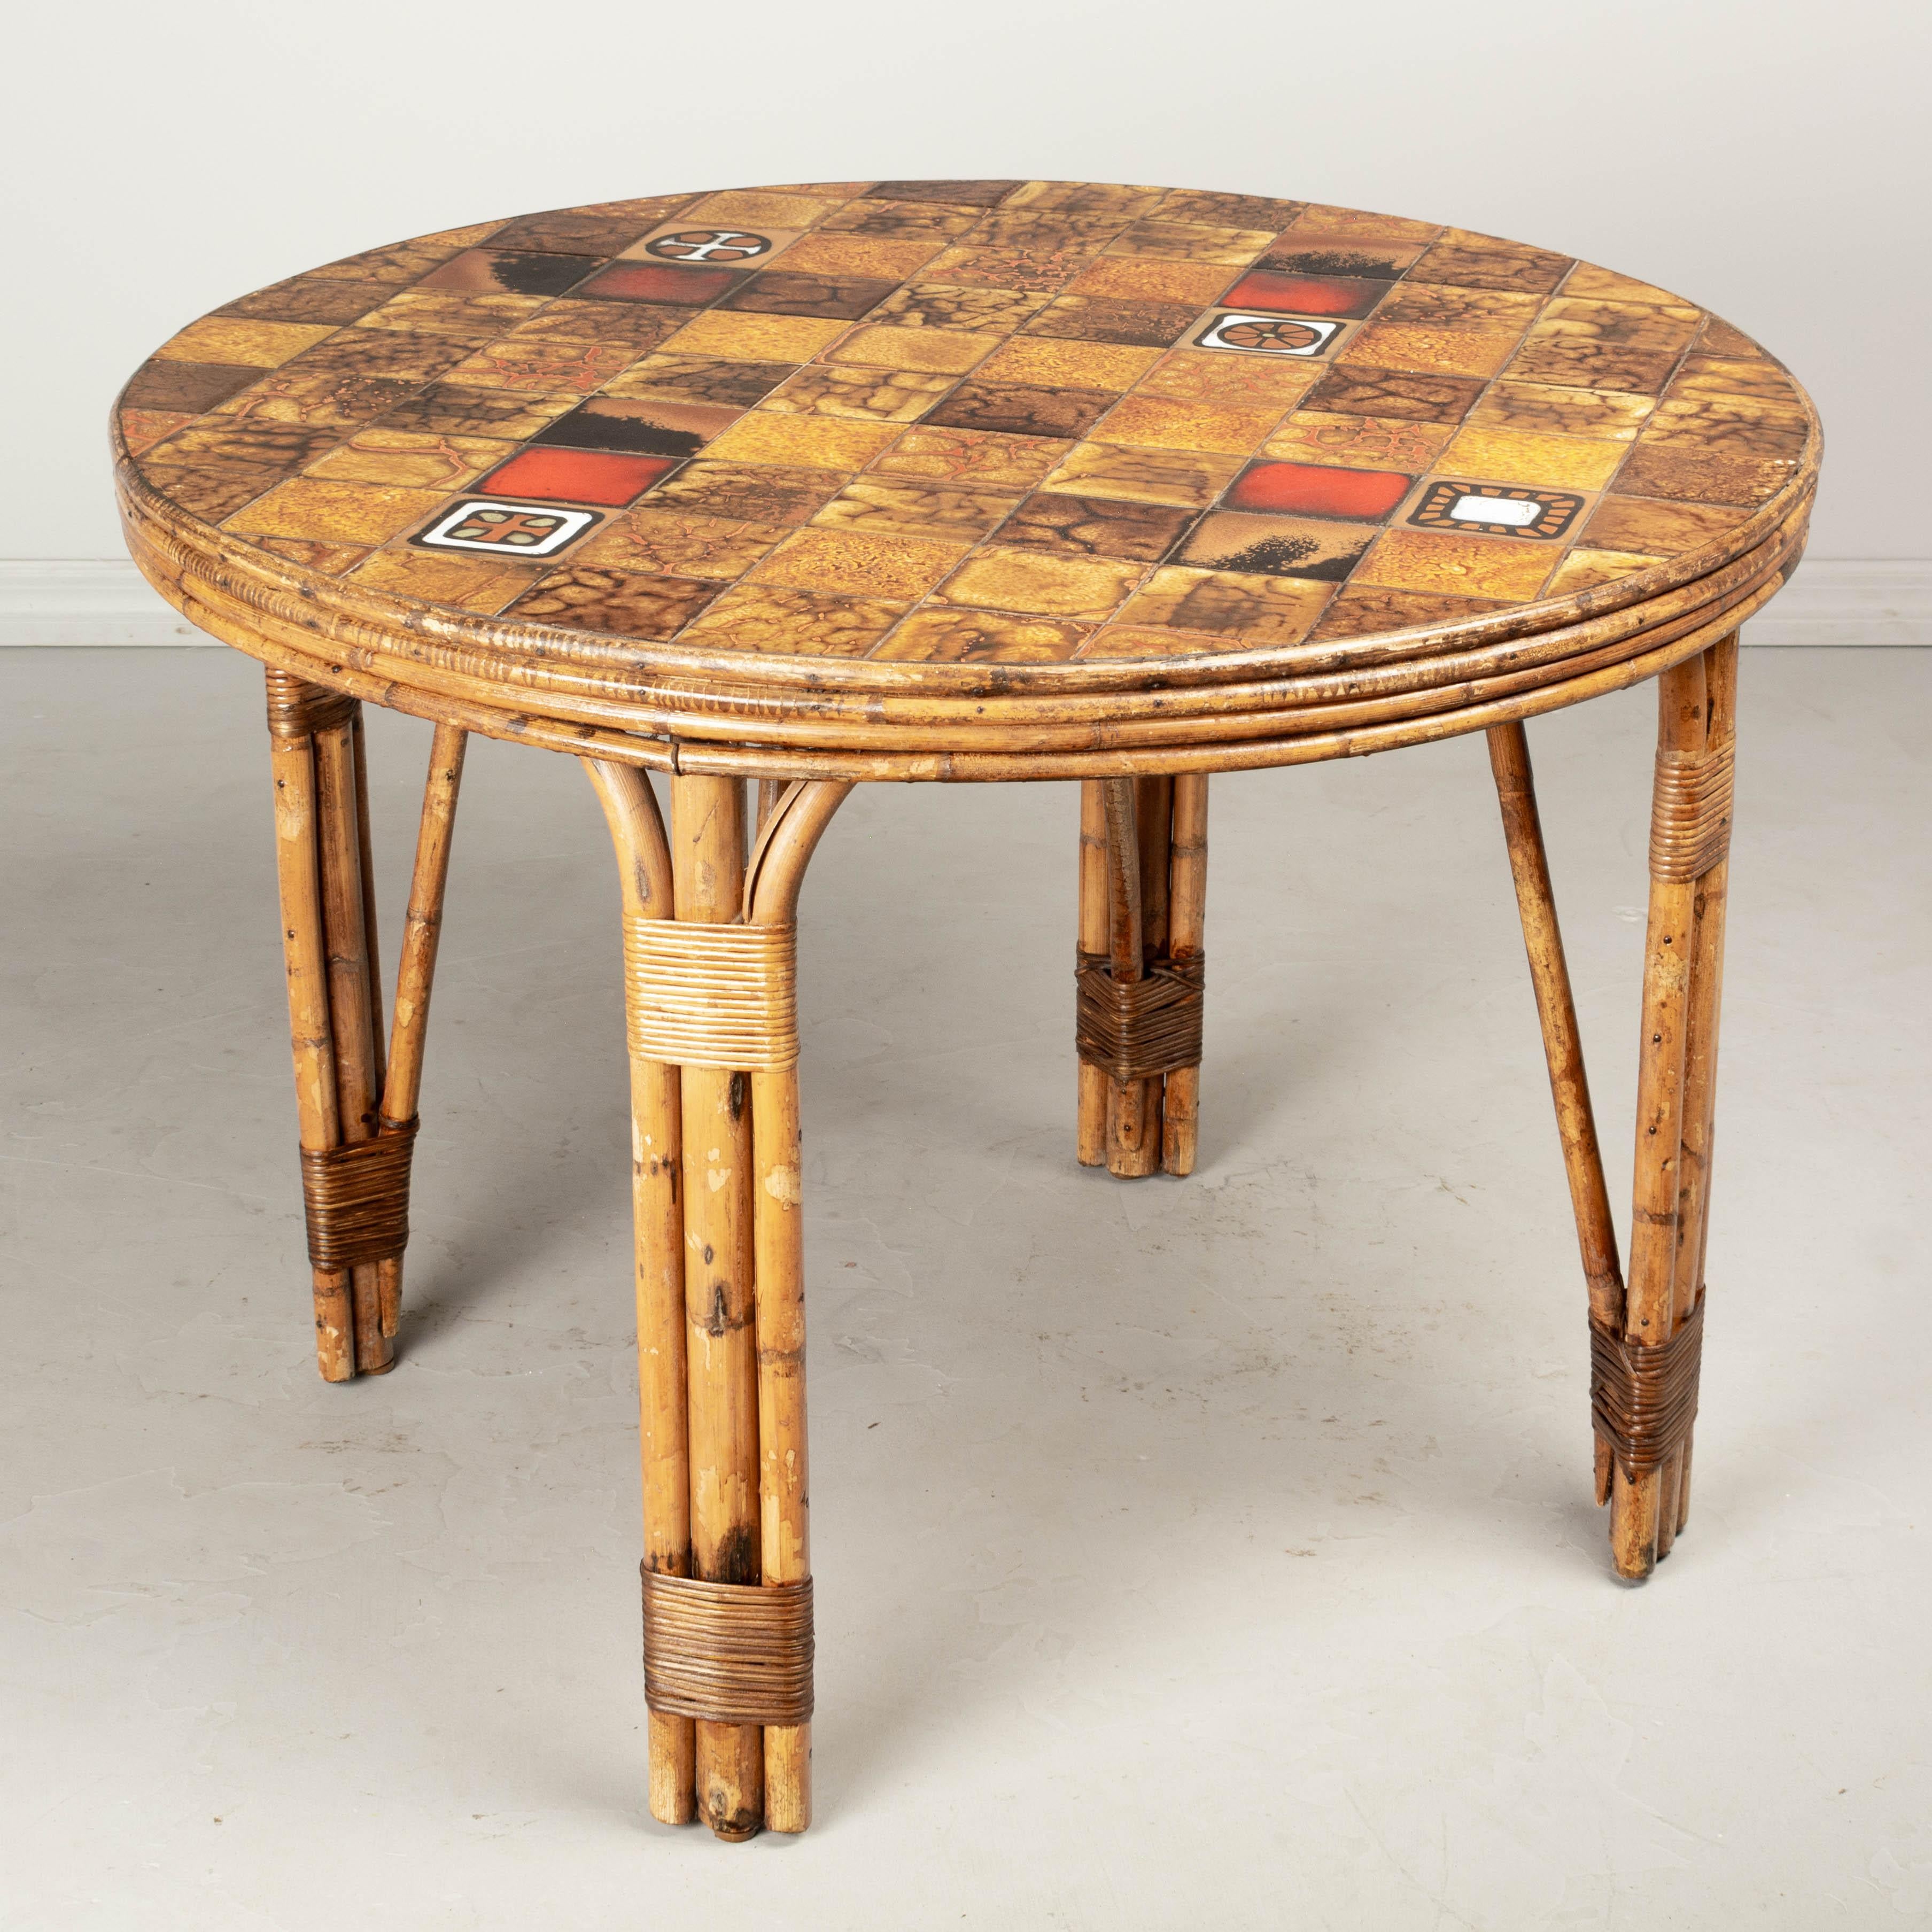 Hand-Crafted Mid-Century French Vallauris Tile Top Dining Table For Sale